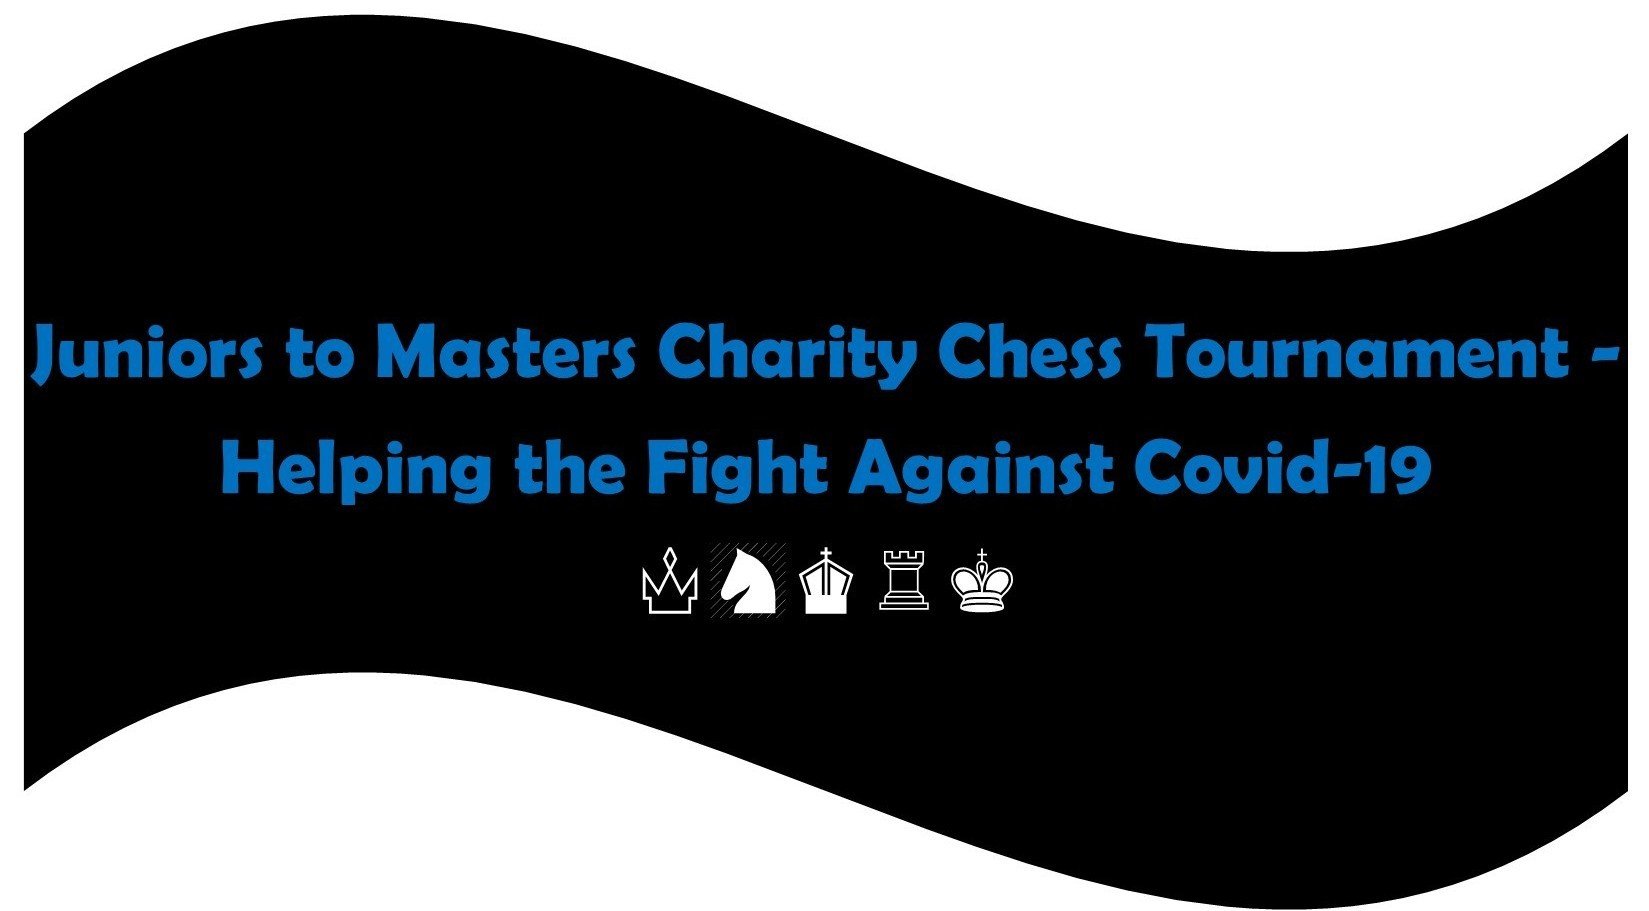 Juniors to Masters Charity Chess Tournament - Helping the Fight Against Covid-19 on Sunday, June 7, 2020